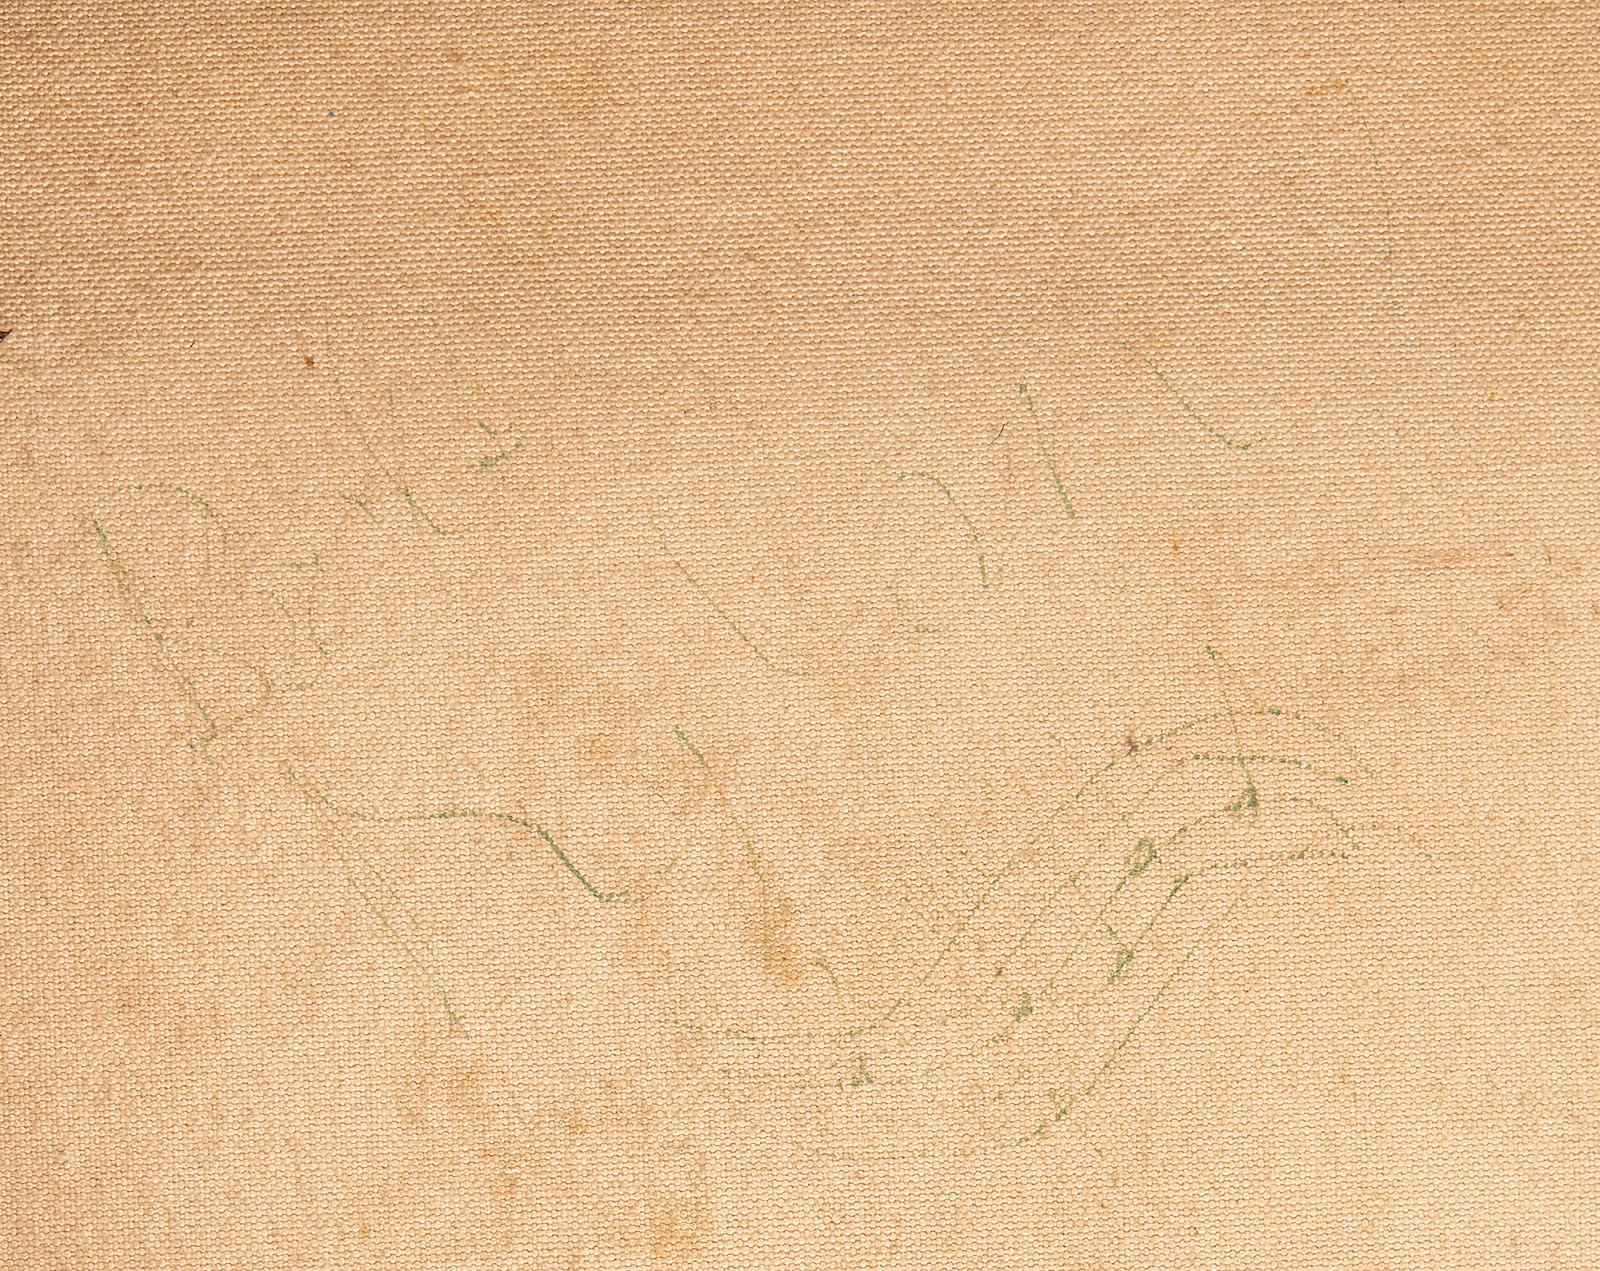 Dylan’s faintly scrawled signature on the painting’s reverse.